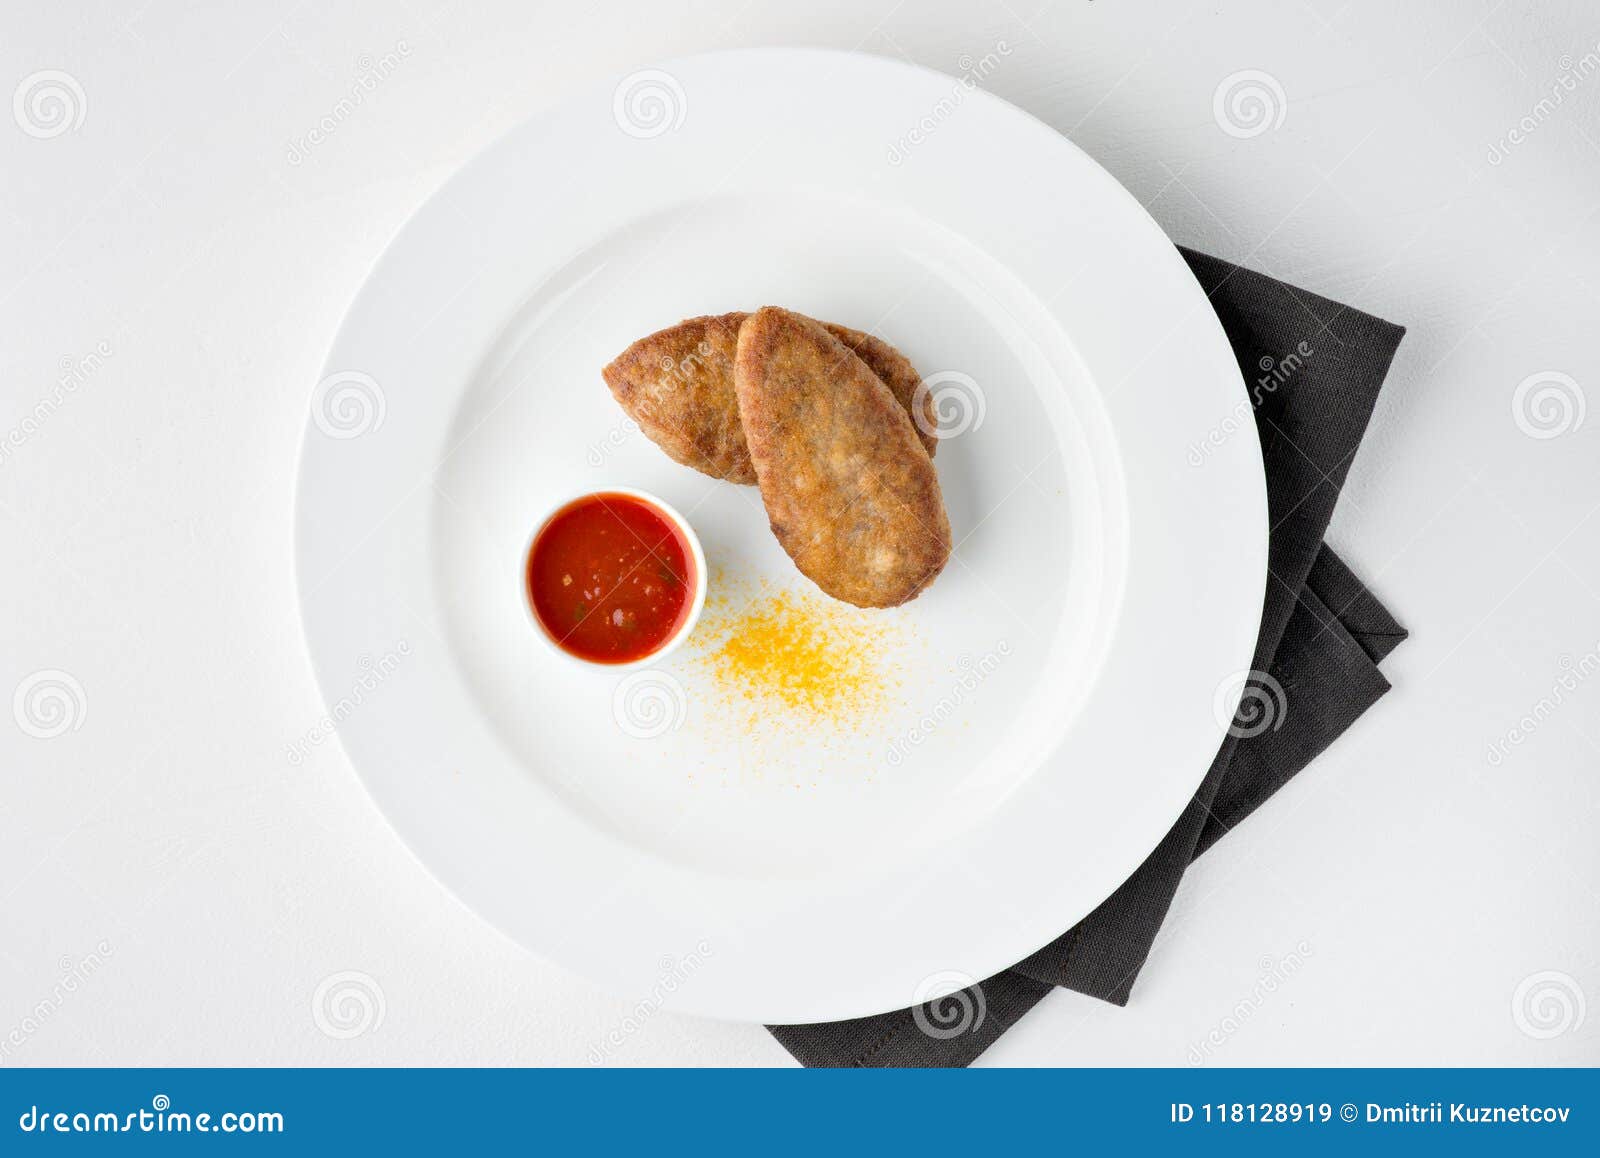 Fried Meat Cutlets With Red Sauce And Decoration Stock Image